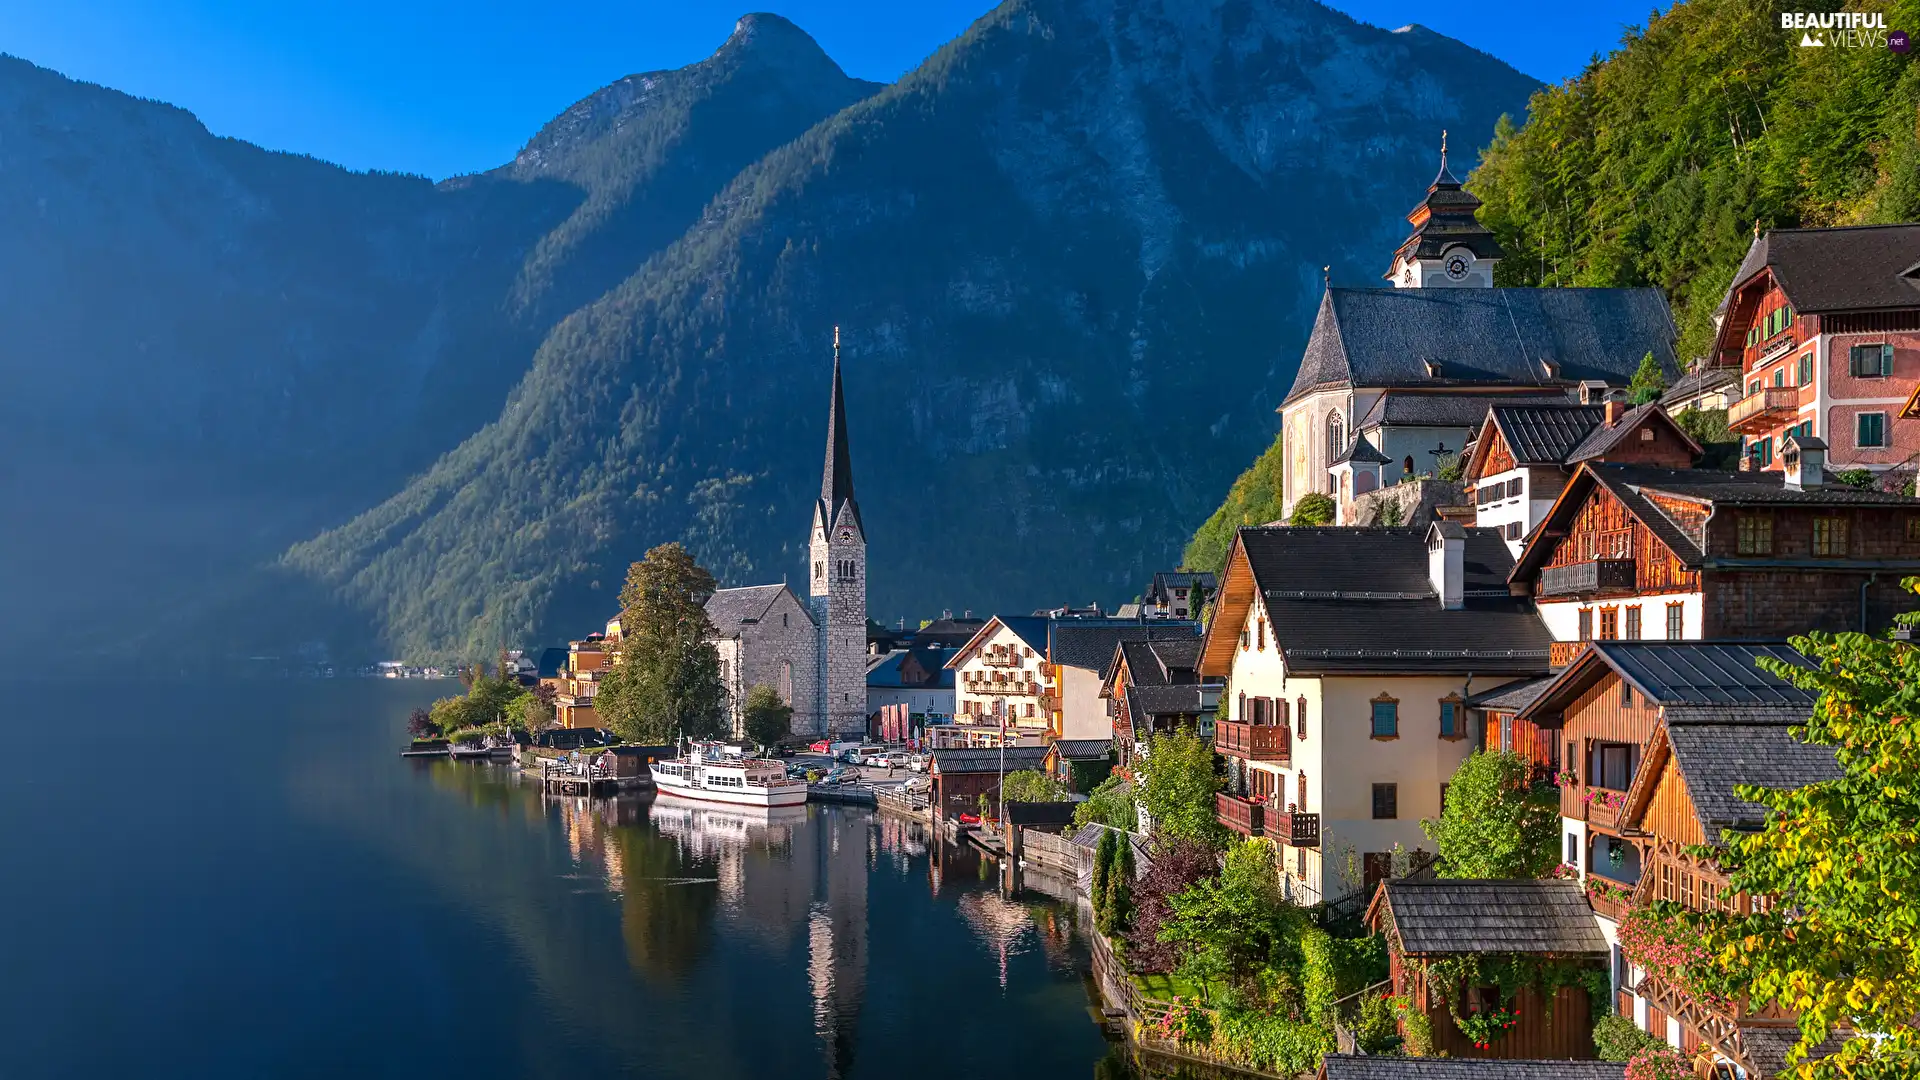 Mountains, woods, Austria, trees, Town Hallstatt, Hallstattersee Lake, Houses, viewes